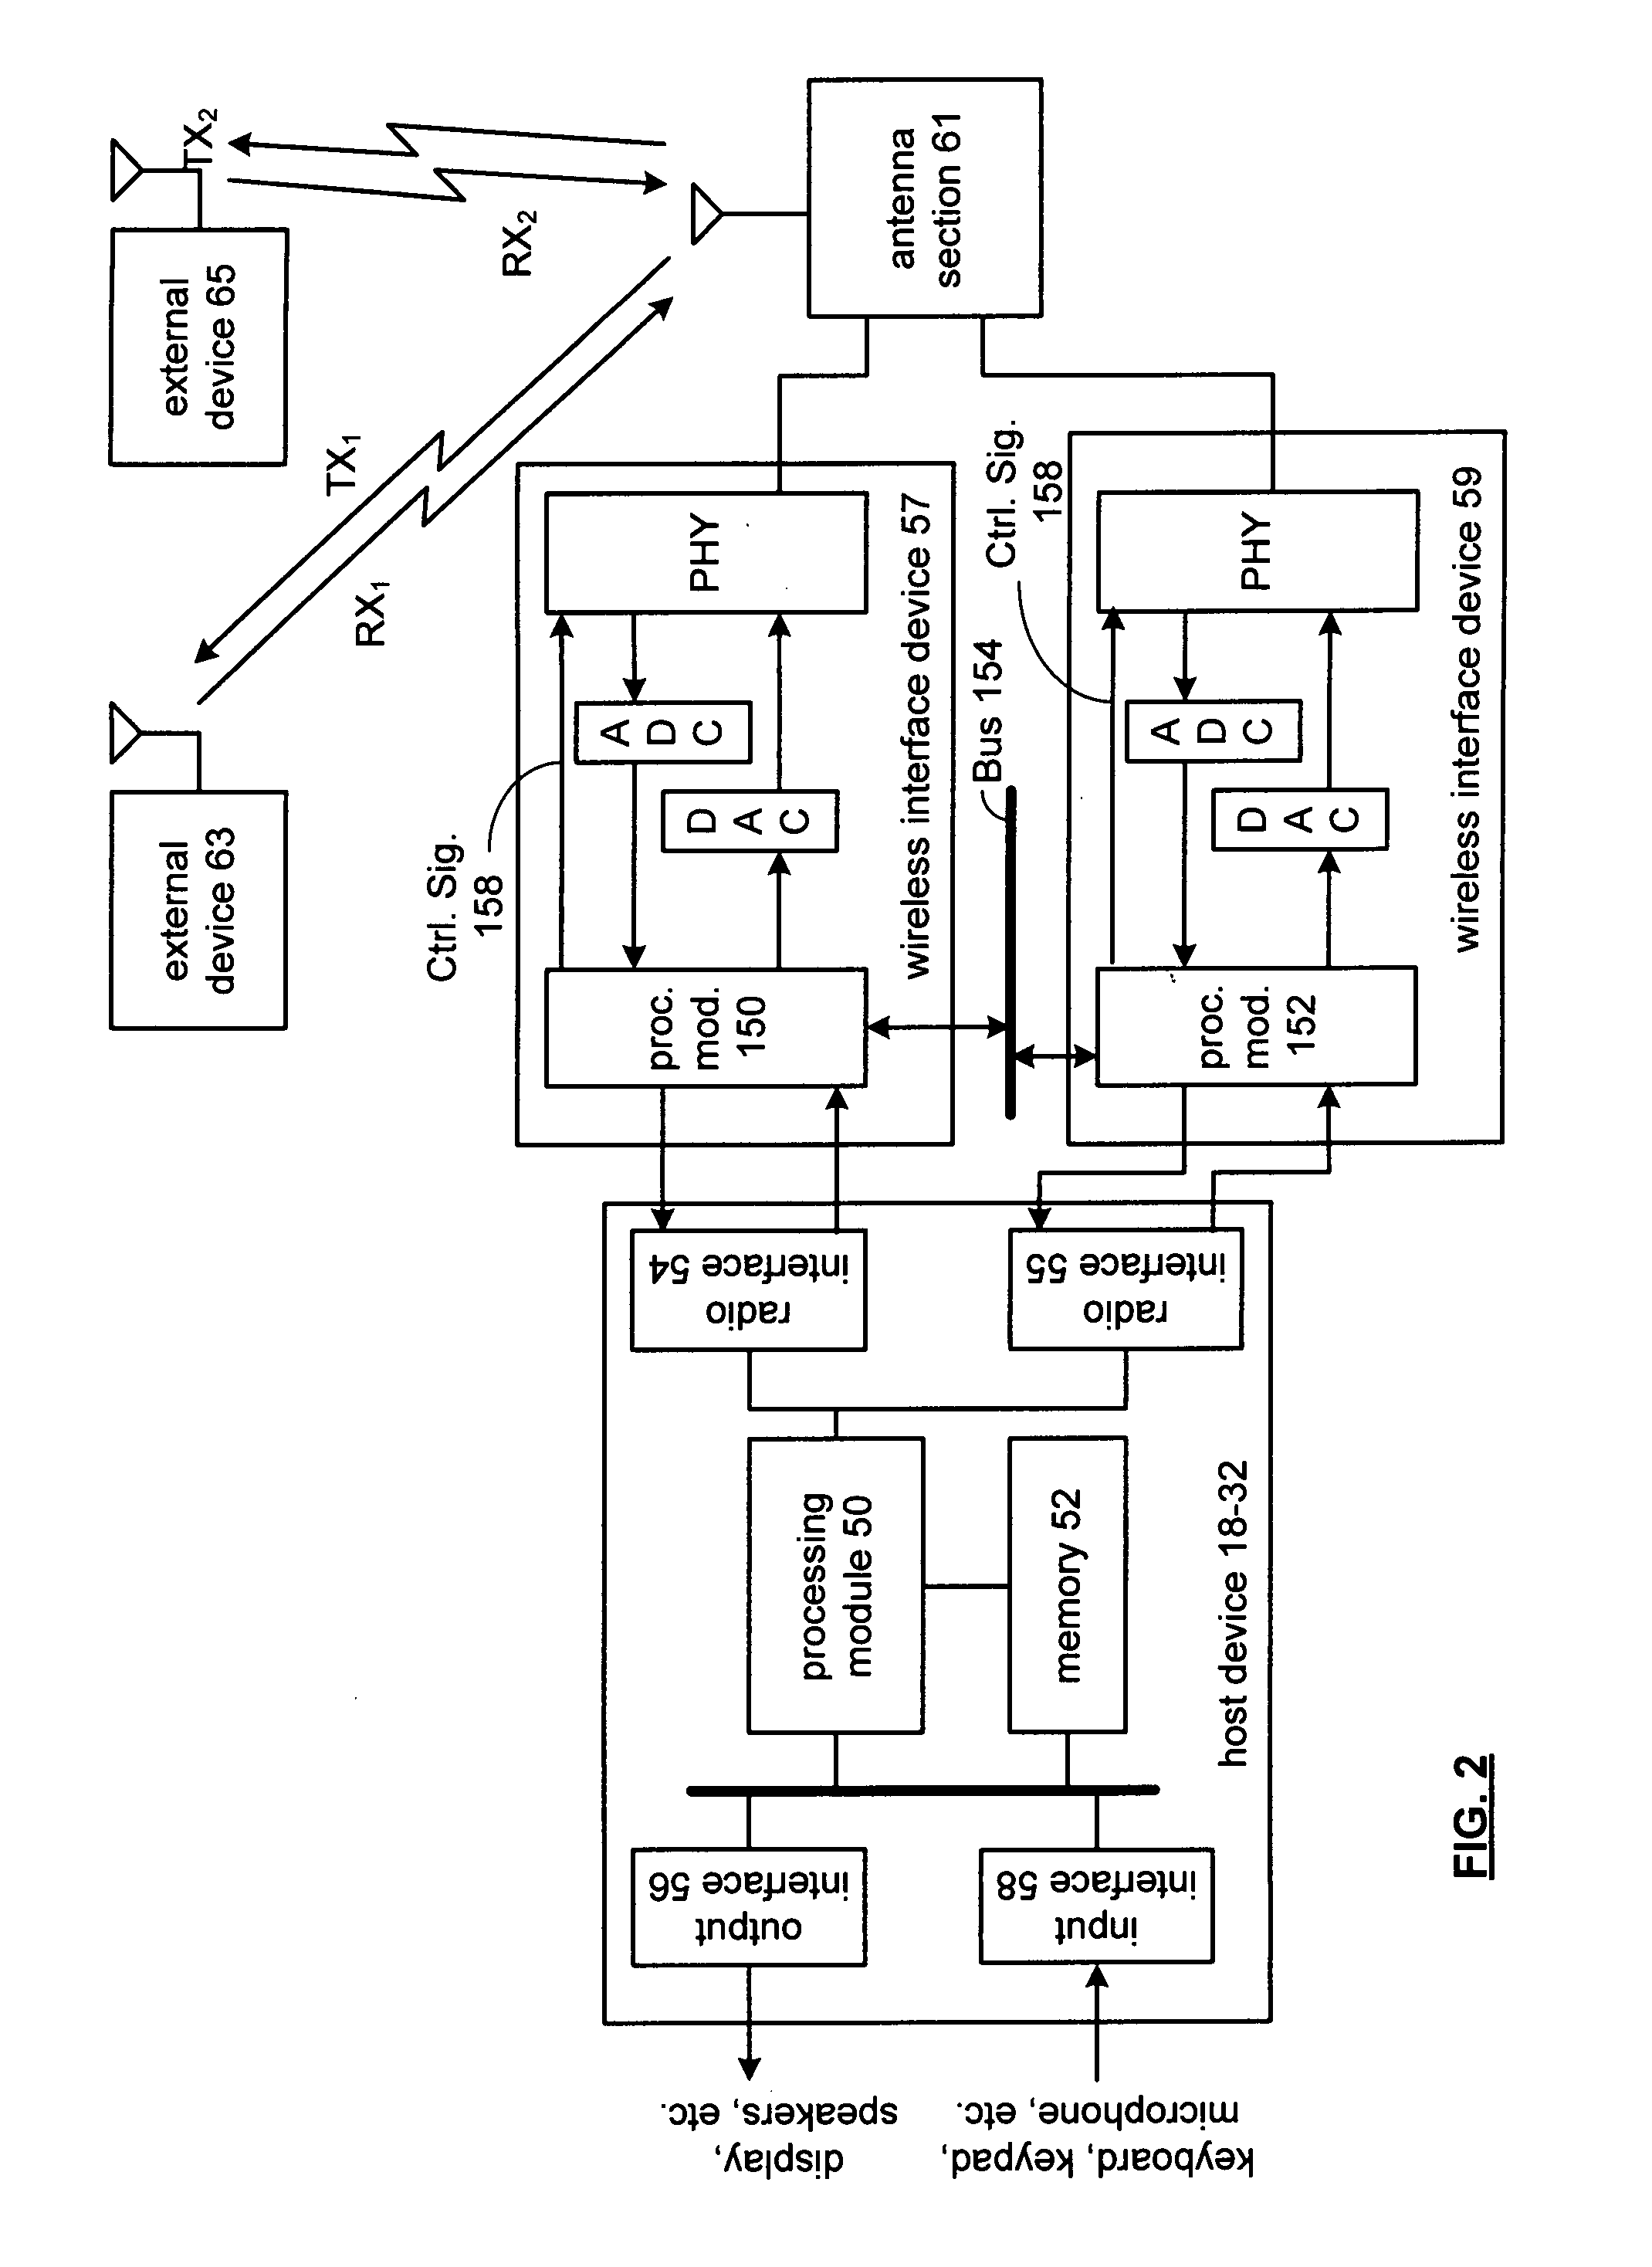 Shared processing between wireless interface devices of a host device